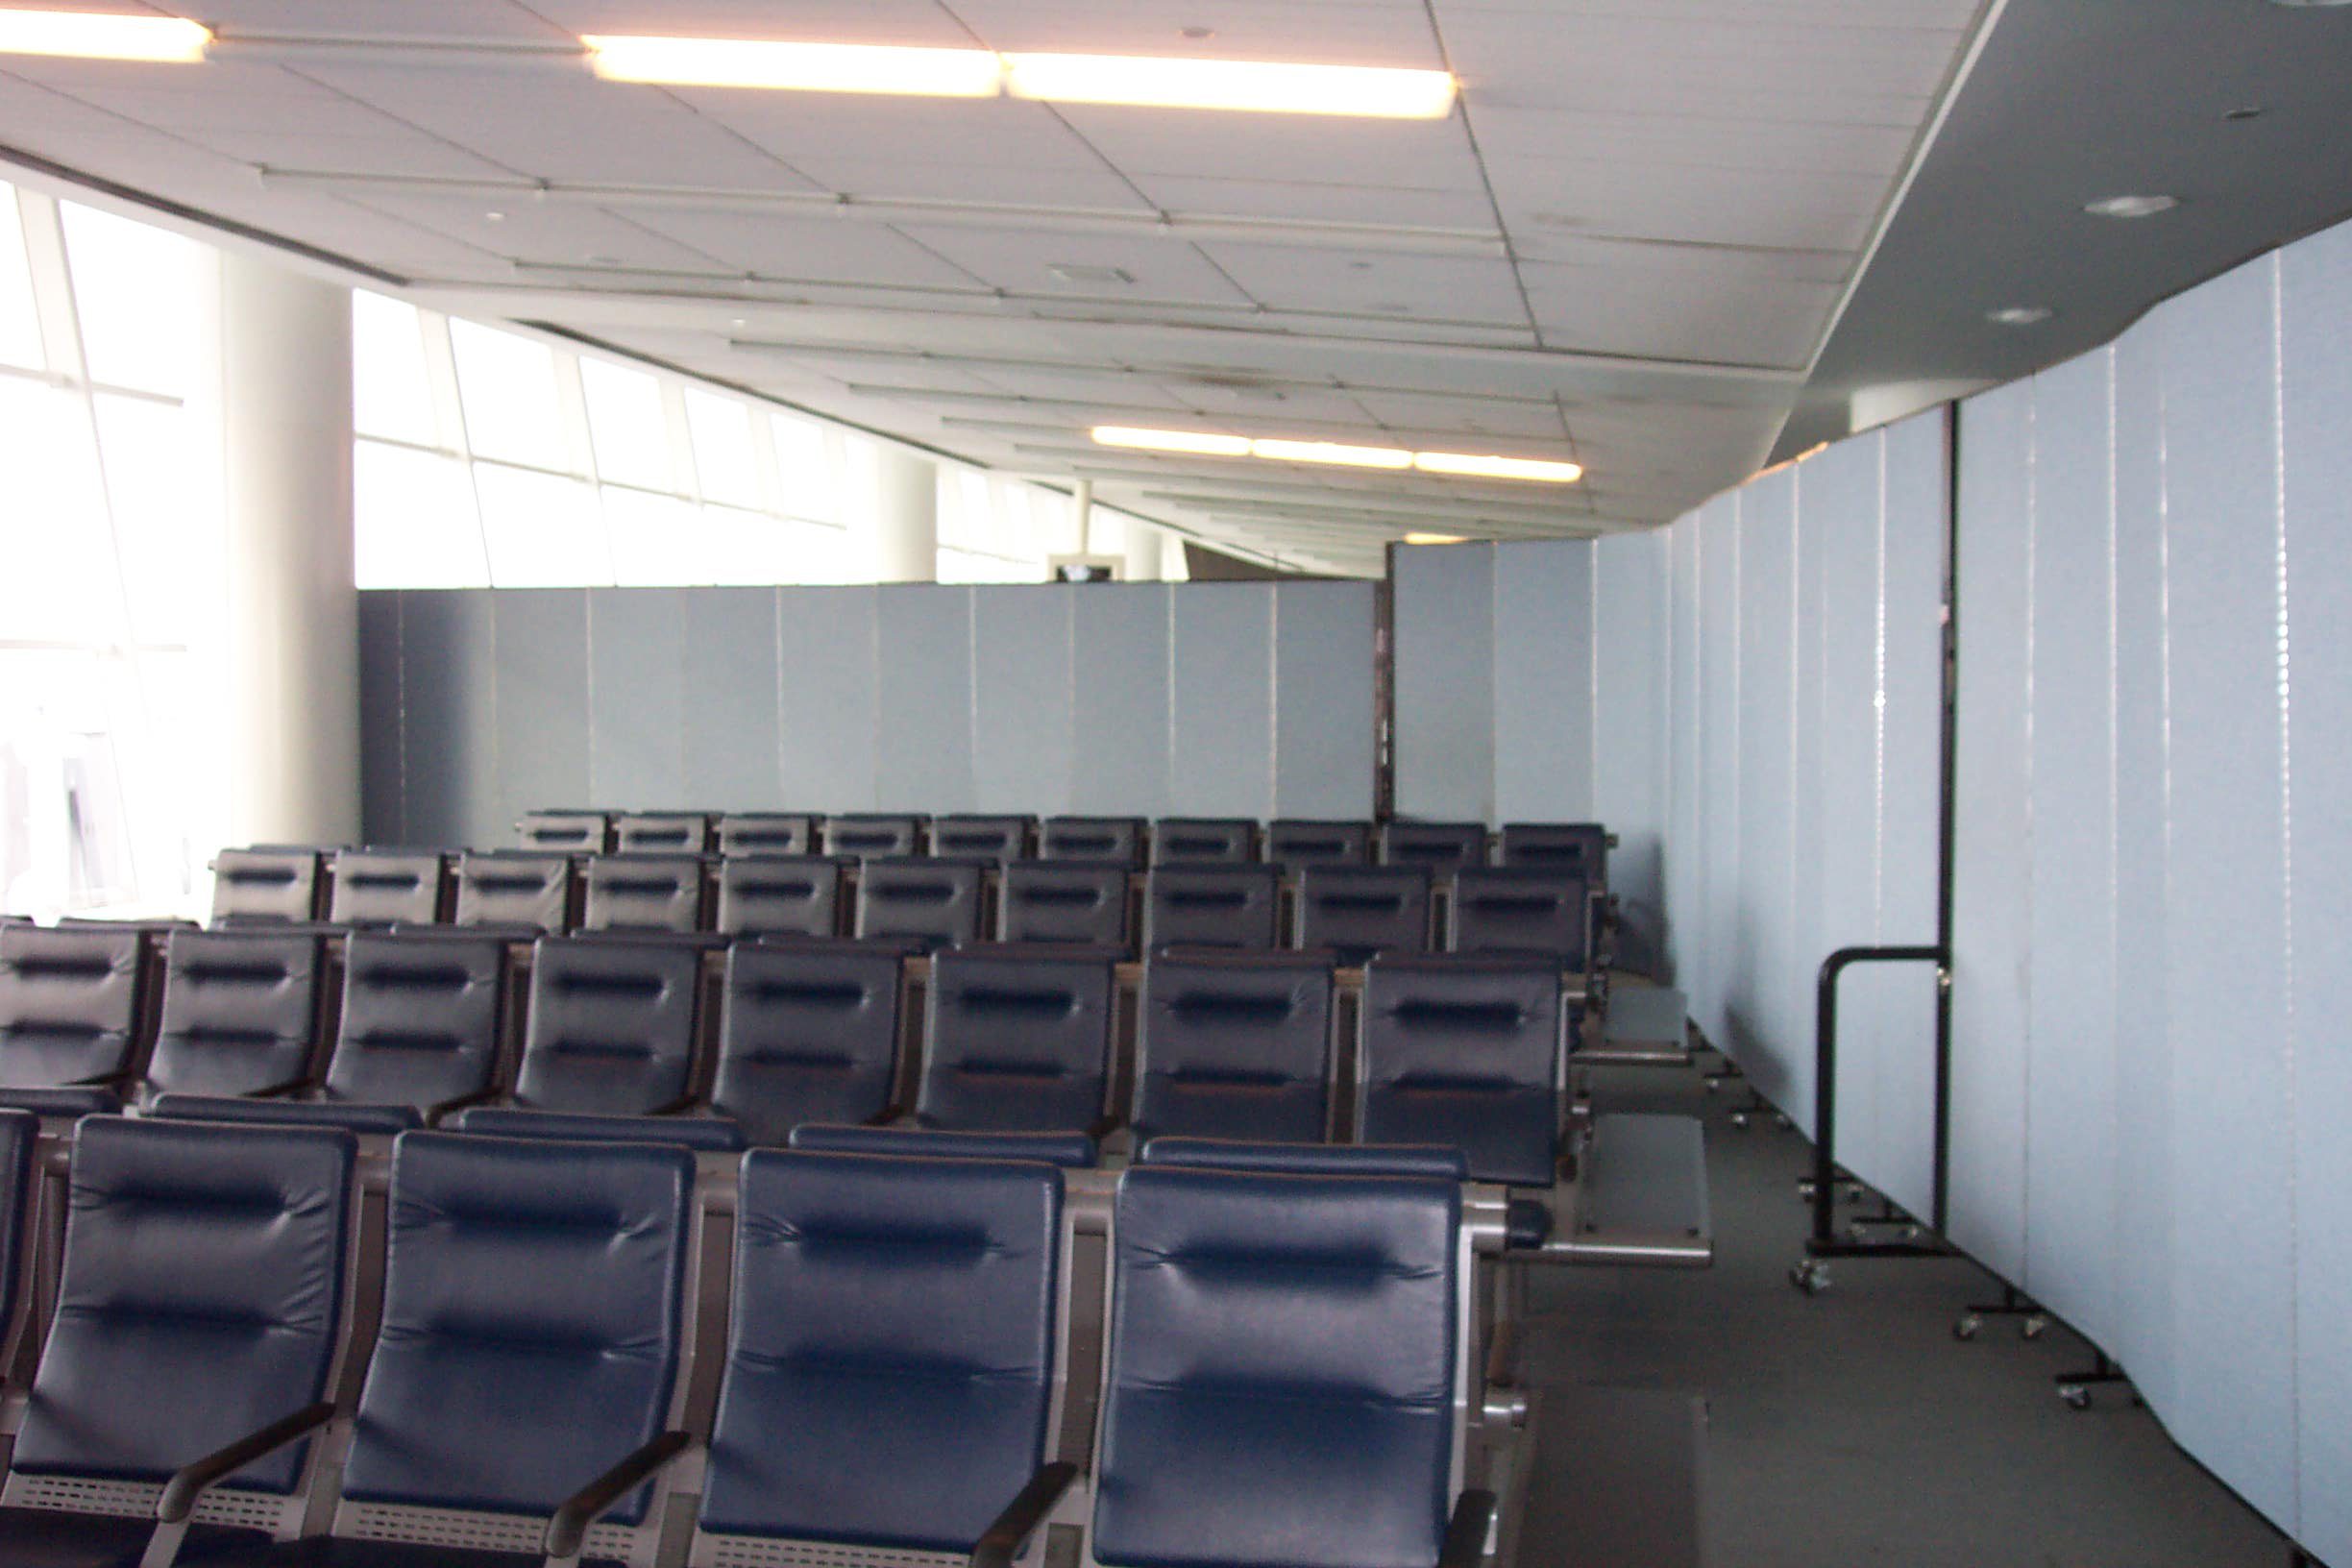 enclosing an airport gate area with portable walls